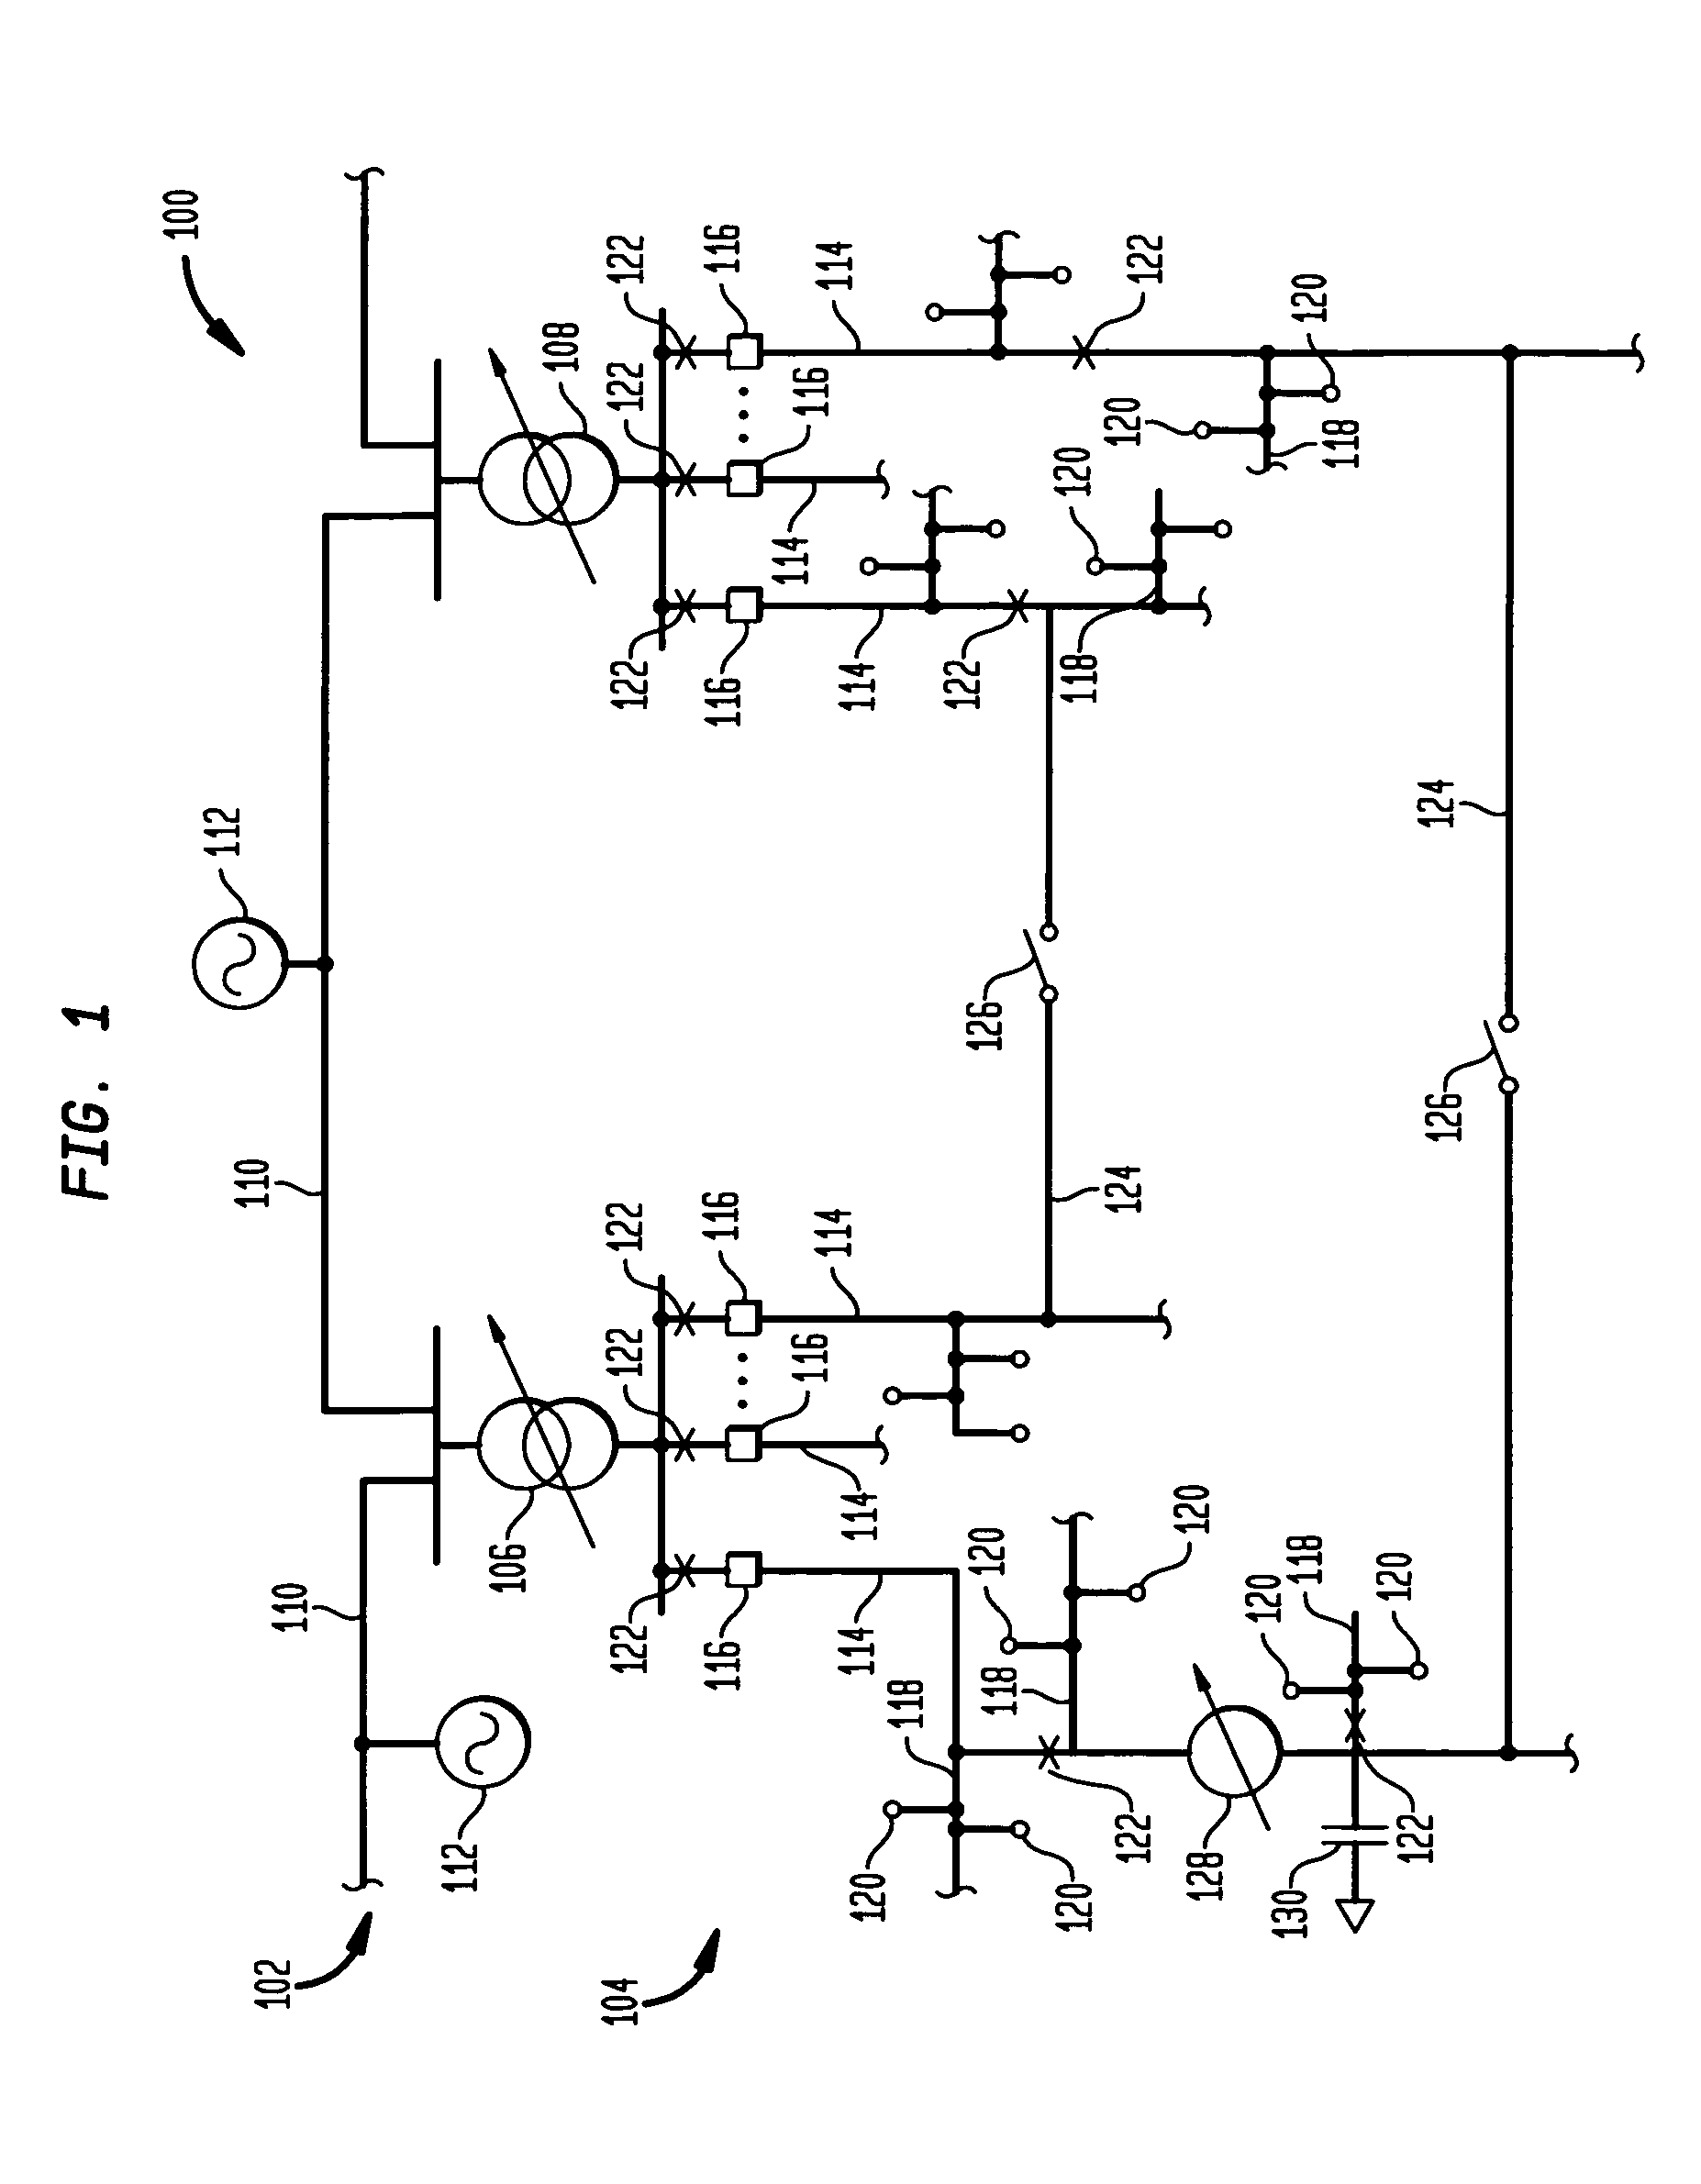 Real time power flow method for distribution system